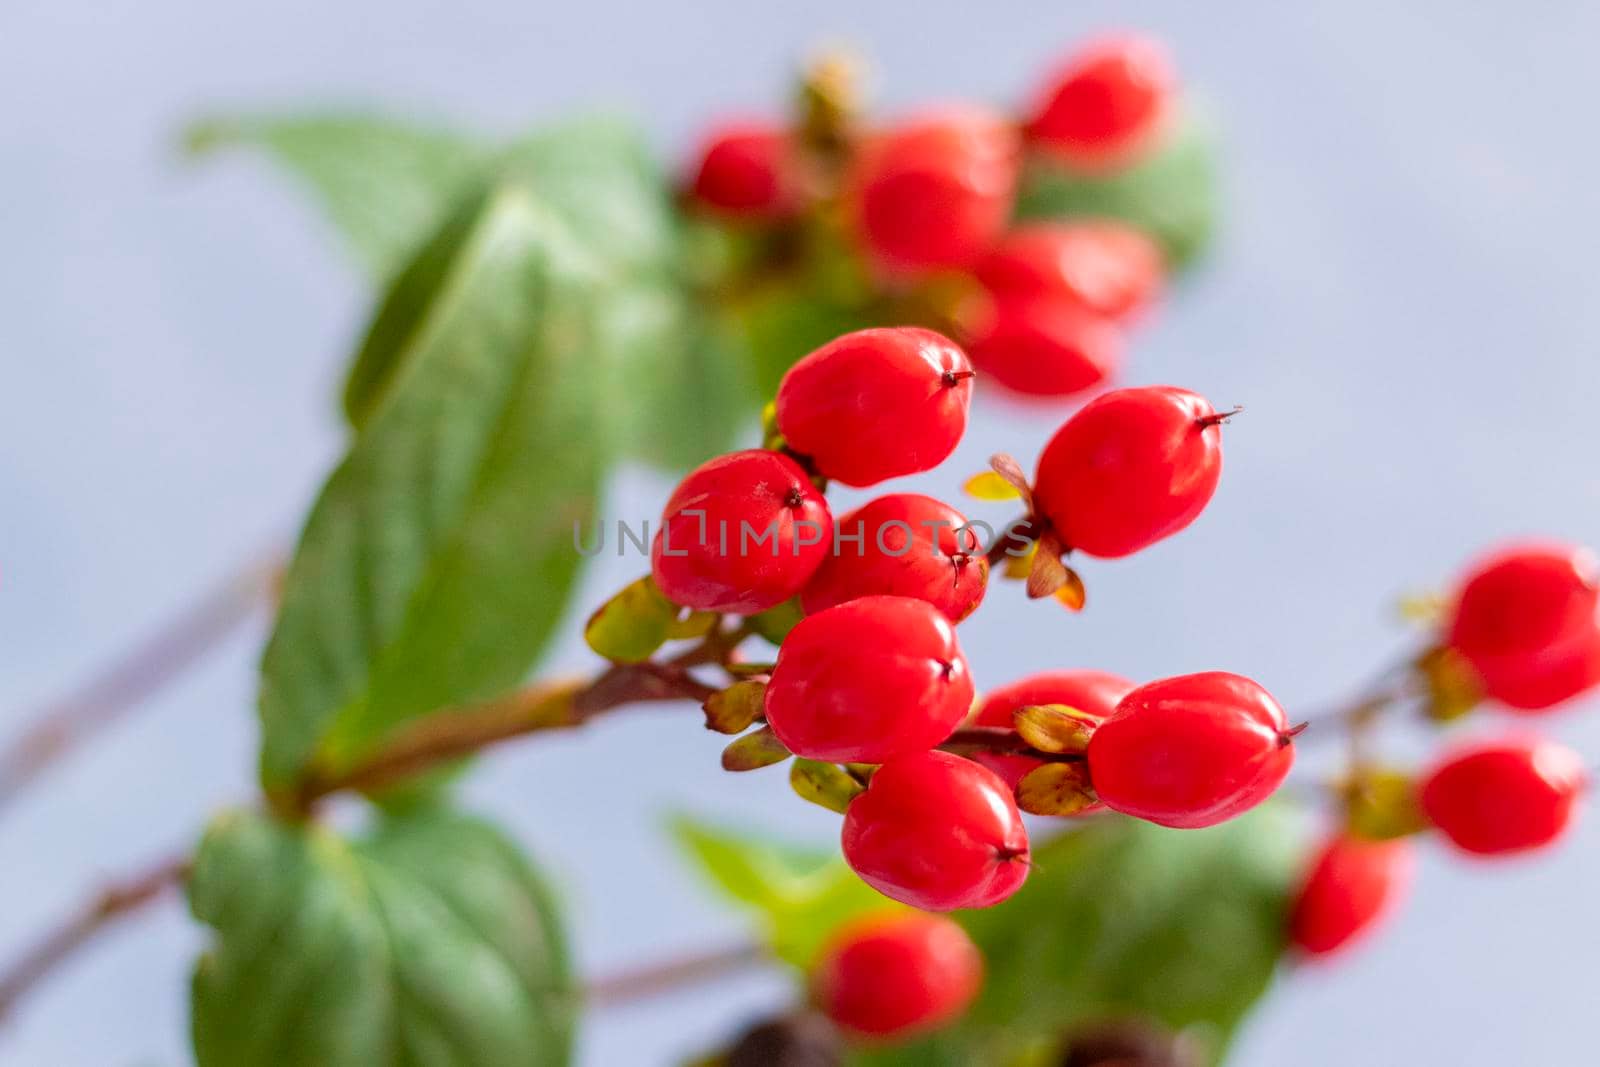 Red fruits of the Hypericum plant